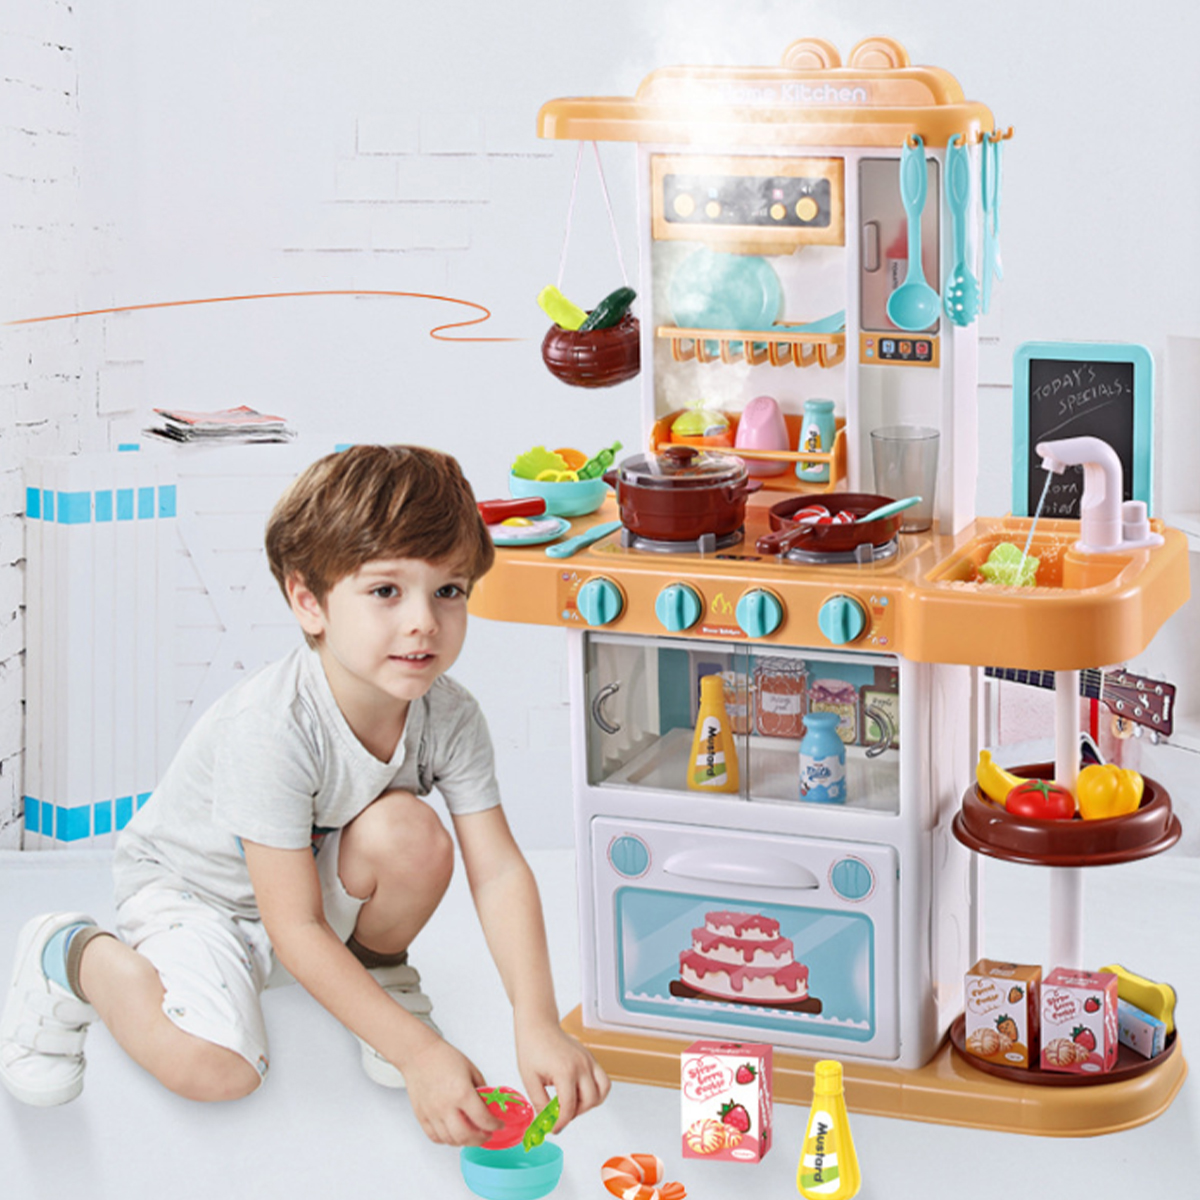 72CM-Height-43-Pcs-ABS-Plastic-Simulation-Spraying-Kitchen-Cooking-Educational-Toy-with-Sound-Light--1710144-3